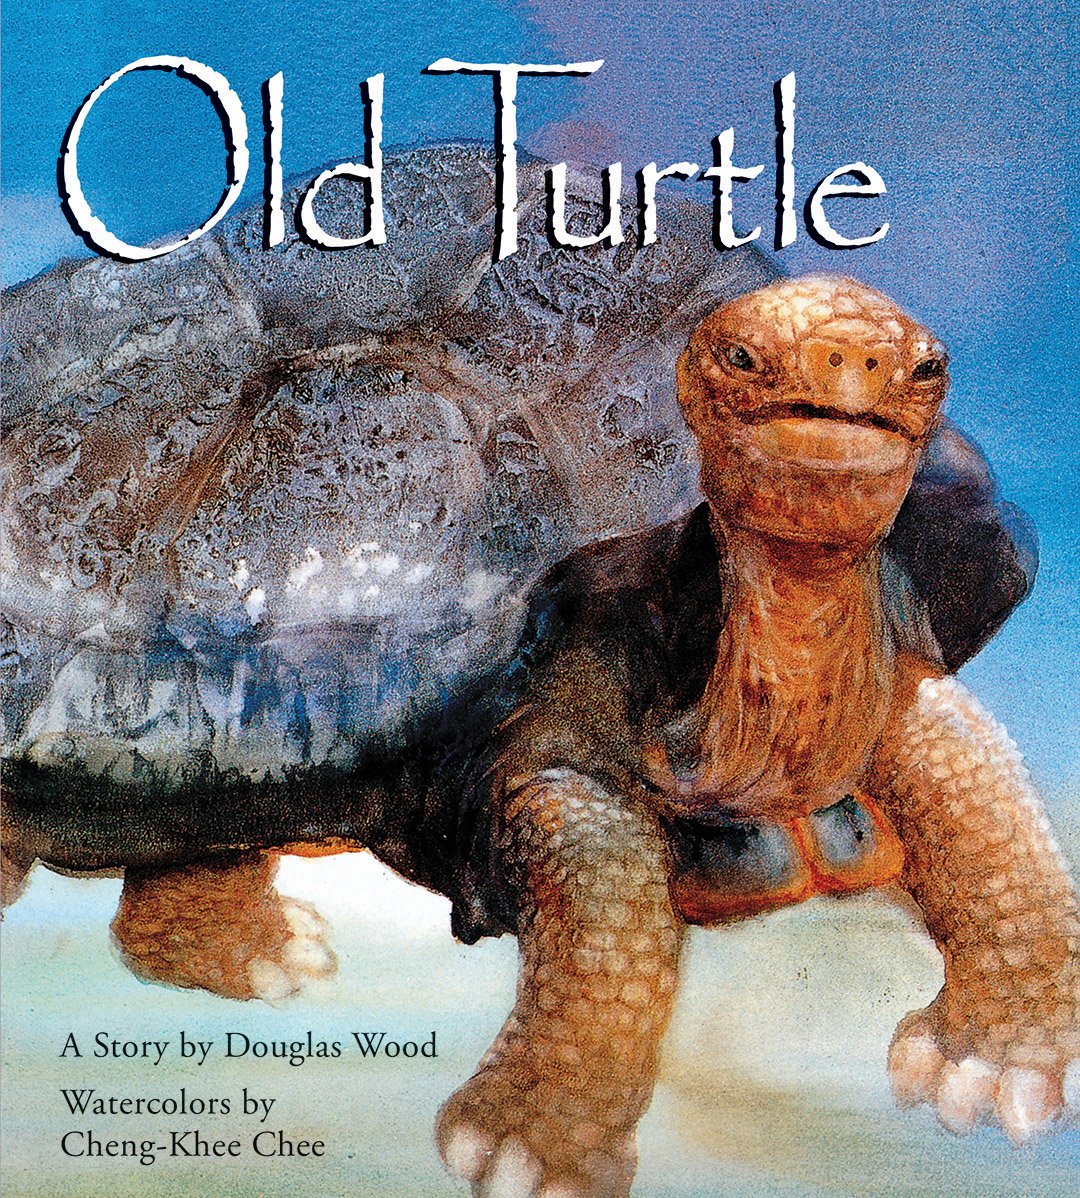 See Old Turtle in Library Catalog